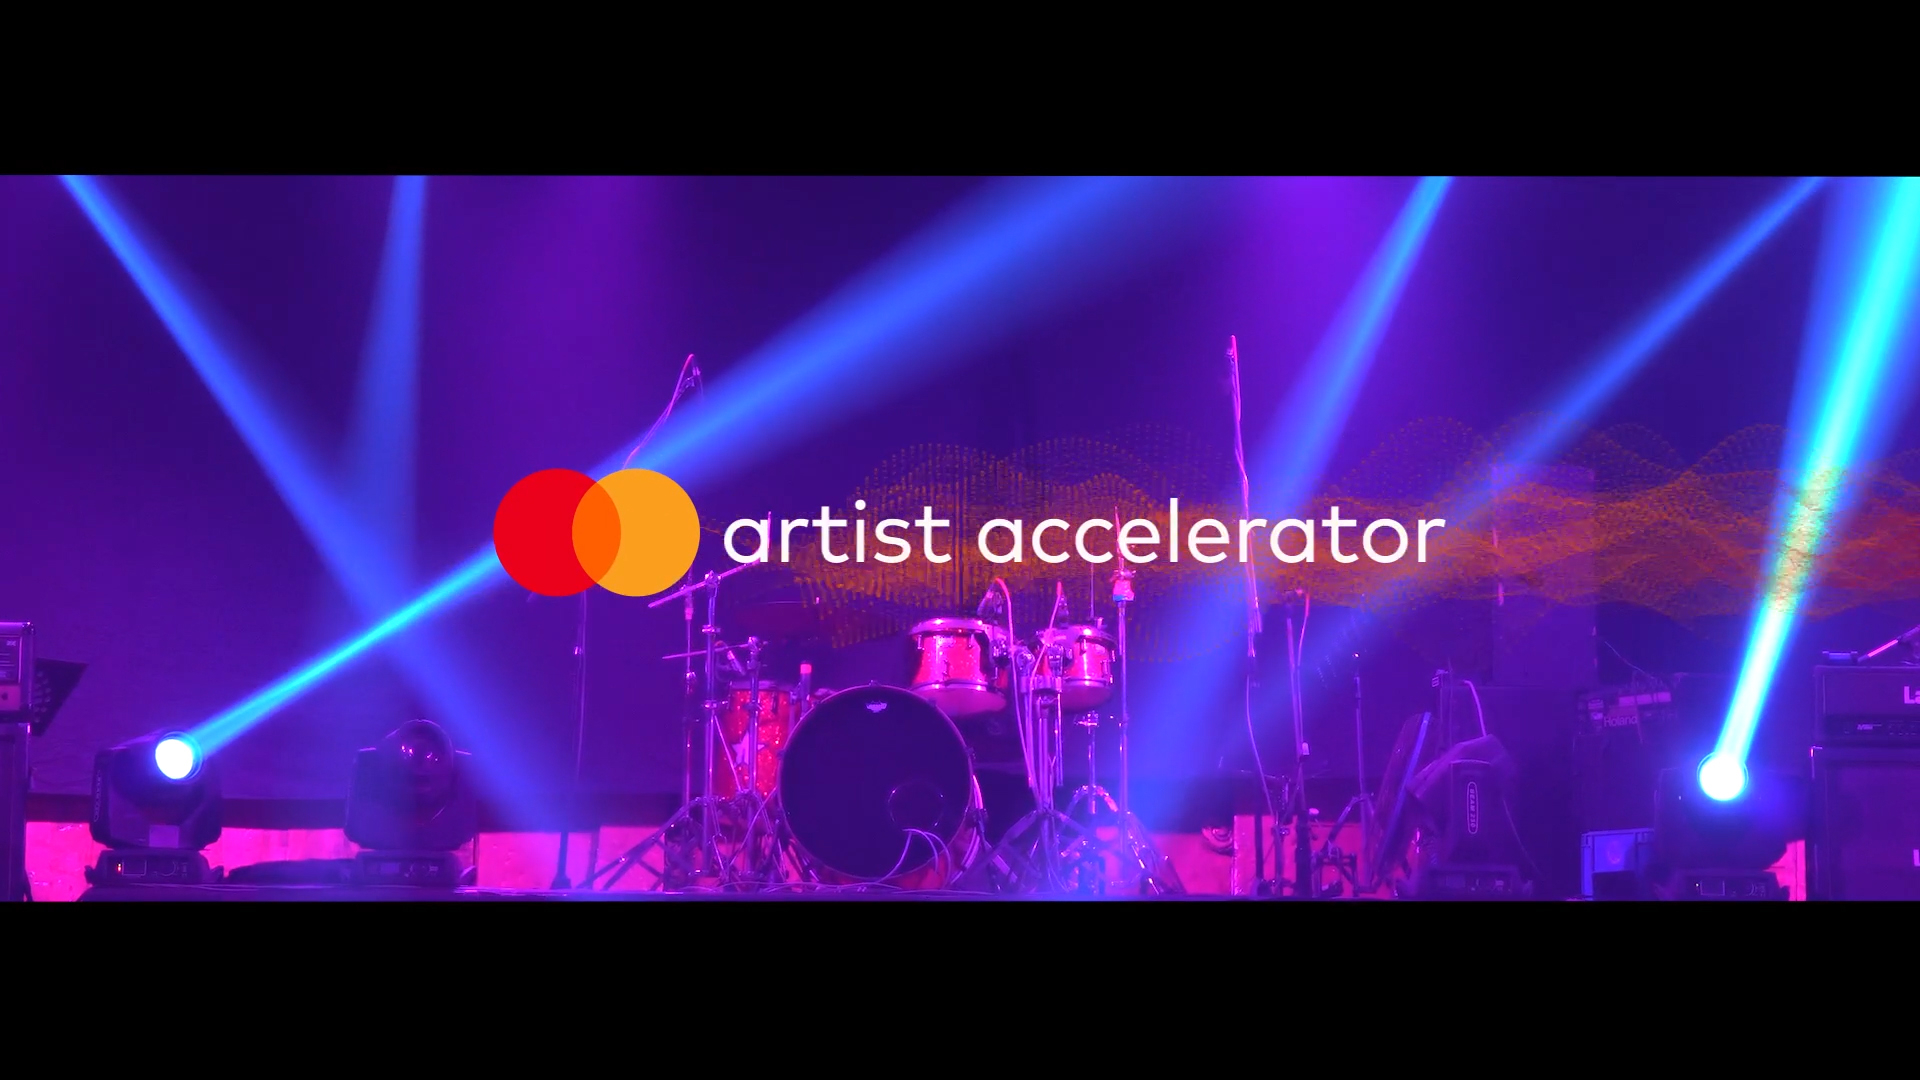 Mastercard extends its Artist Accelerator for a second season. Fans can follow along with the Mastercard Music Pass.